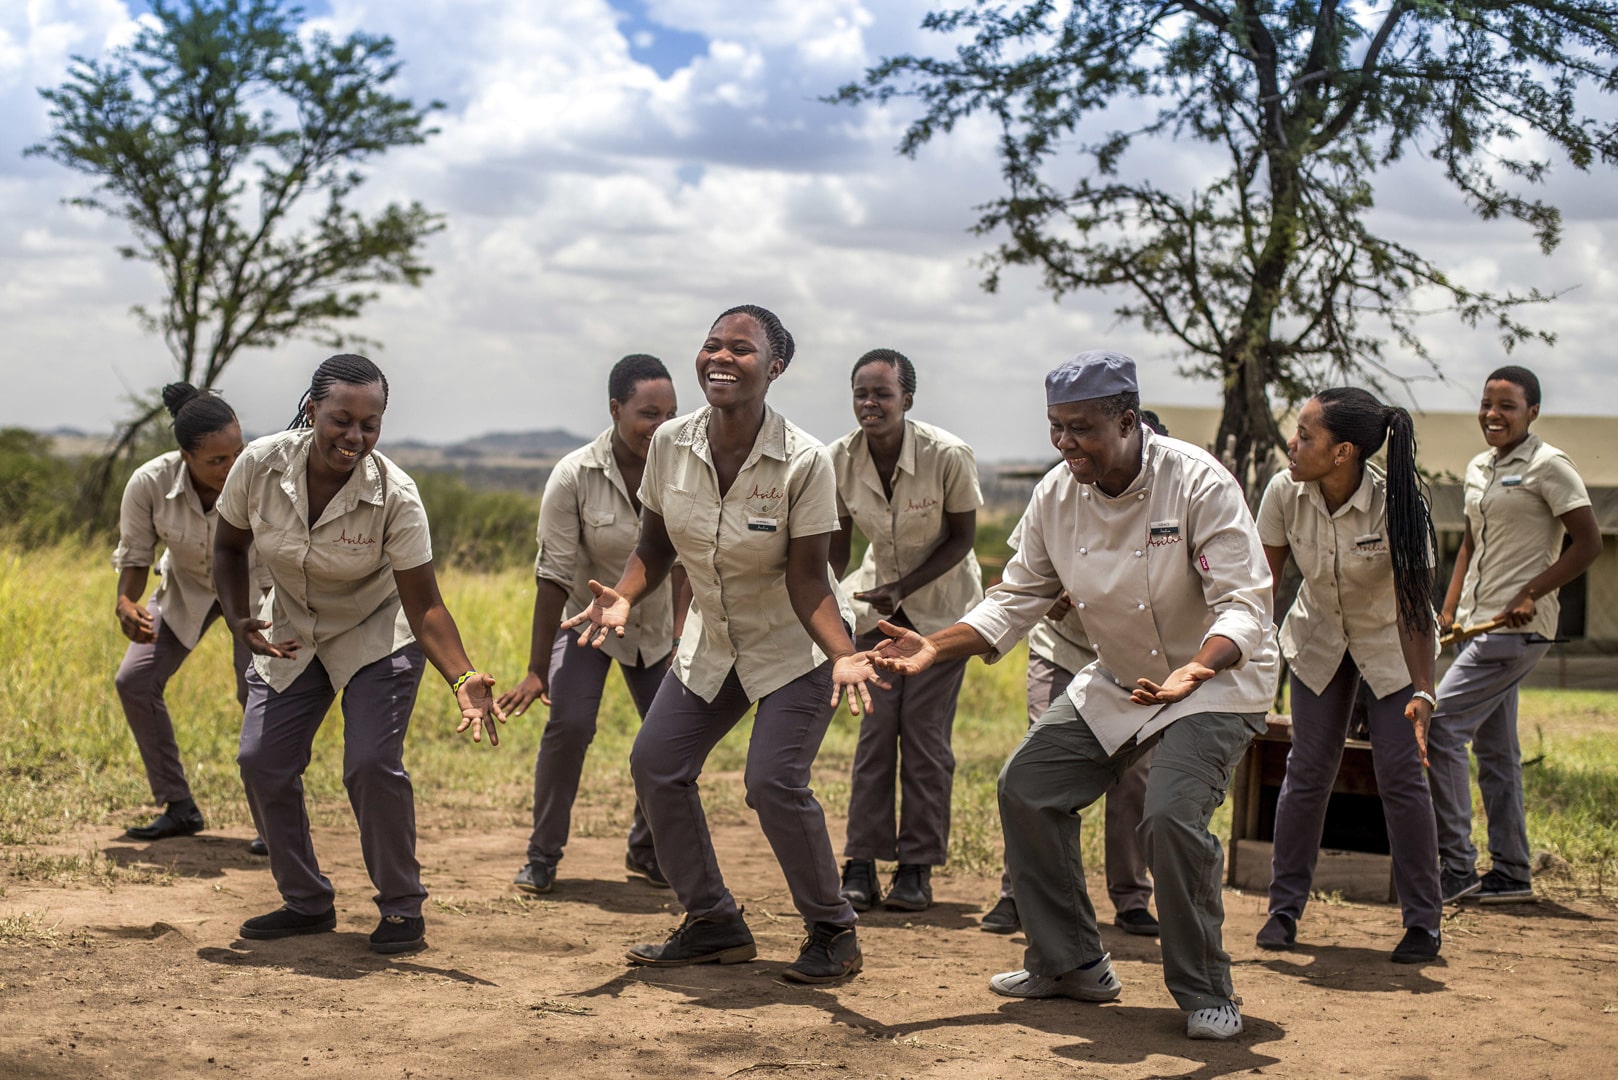 The all-female team at Dunia Camp in the Serengeti.